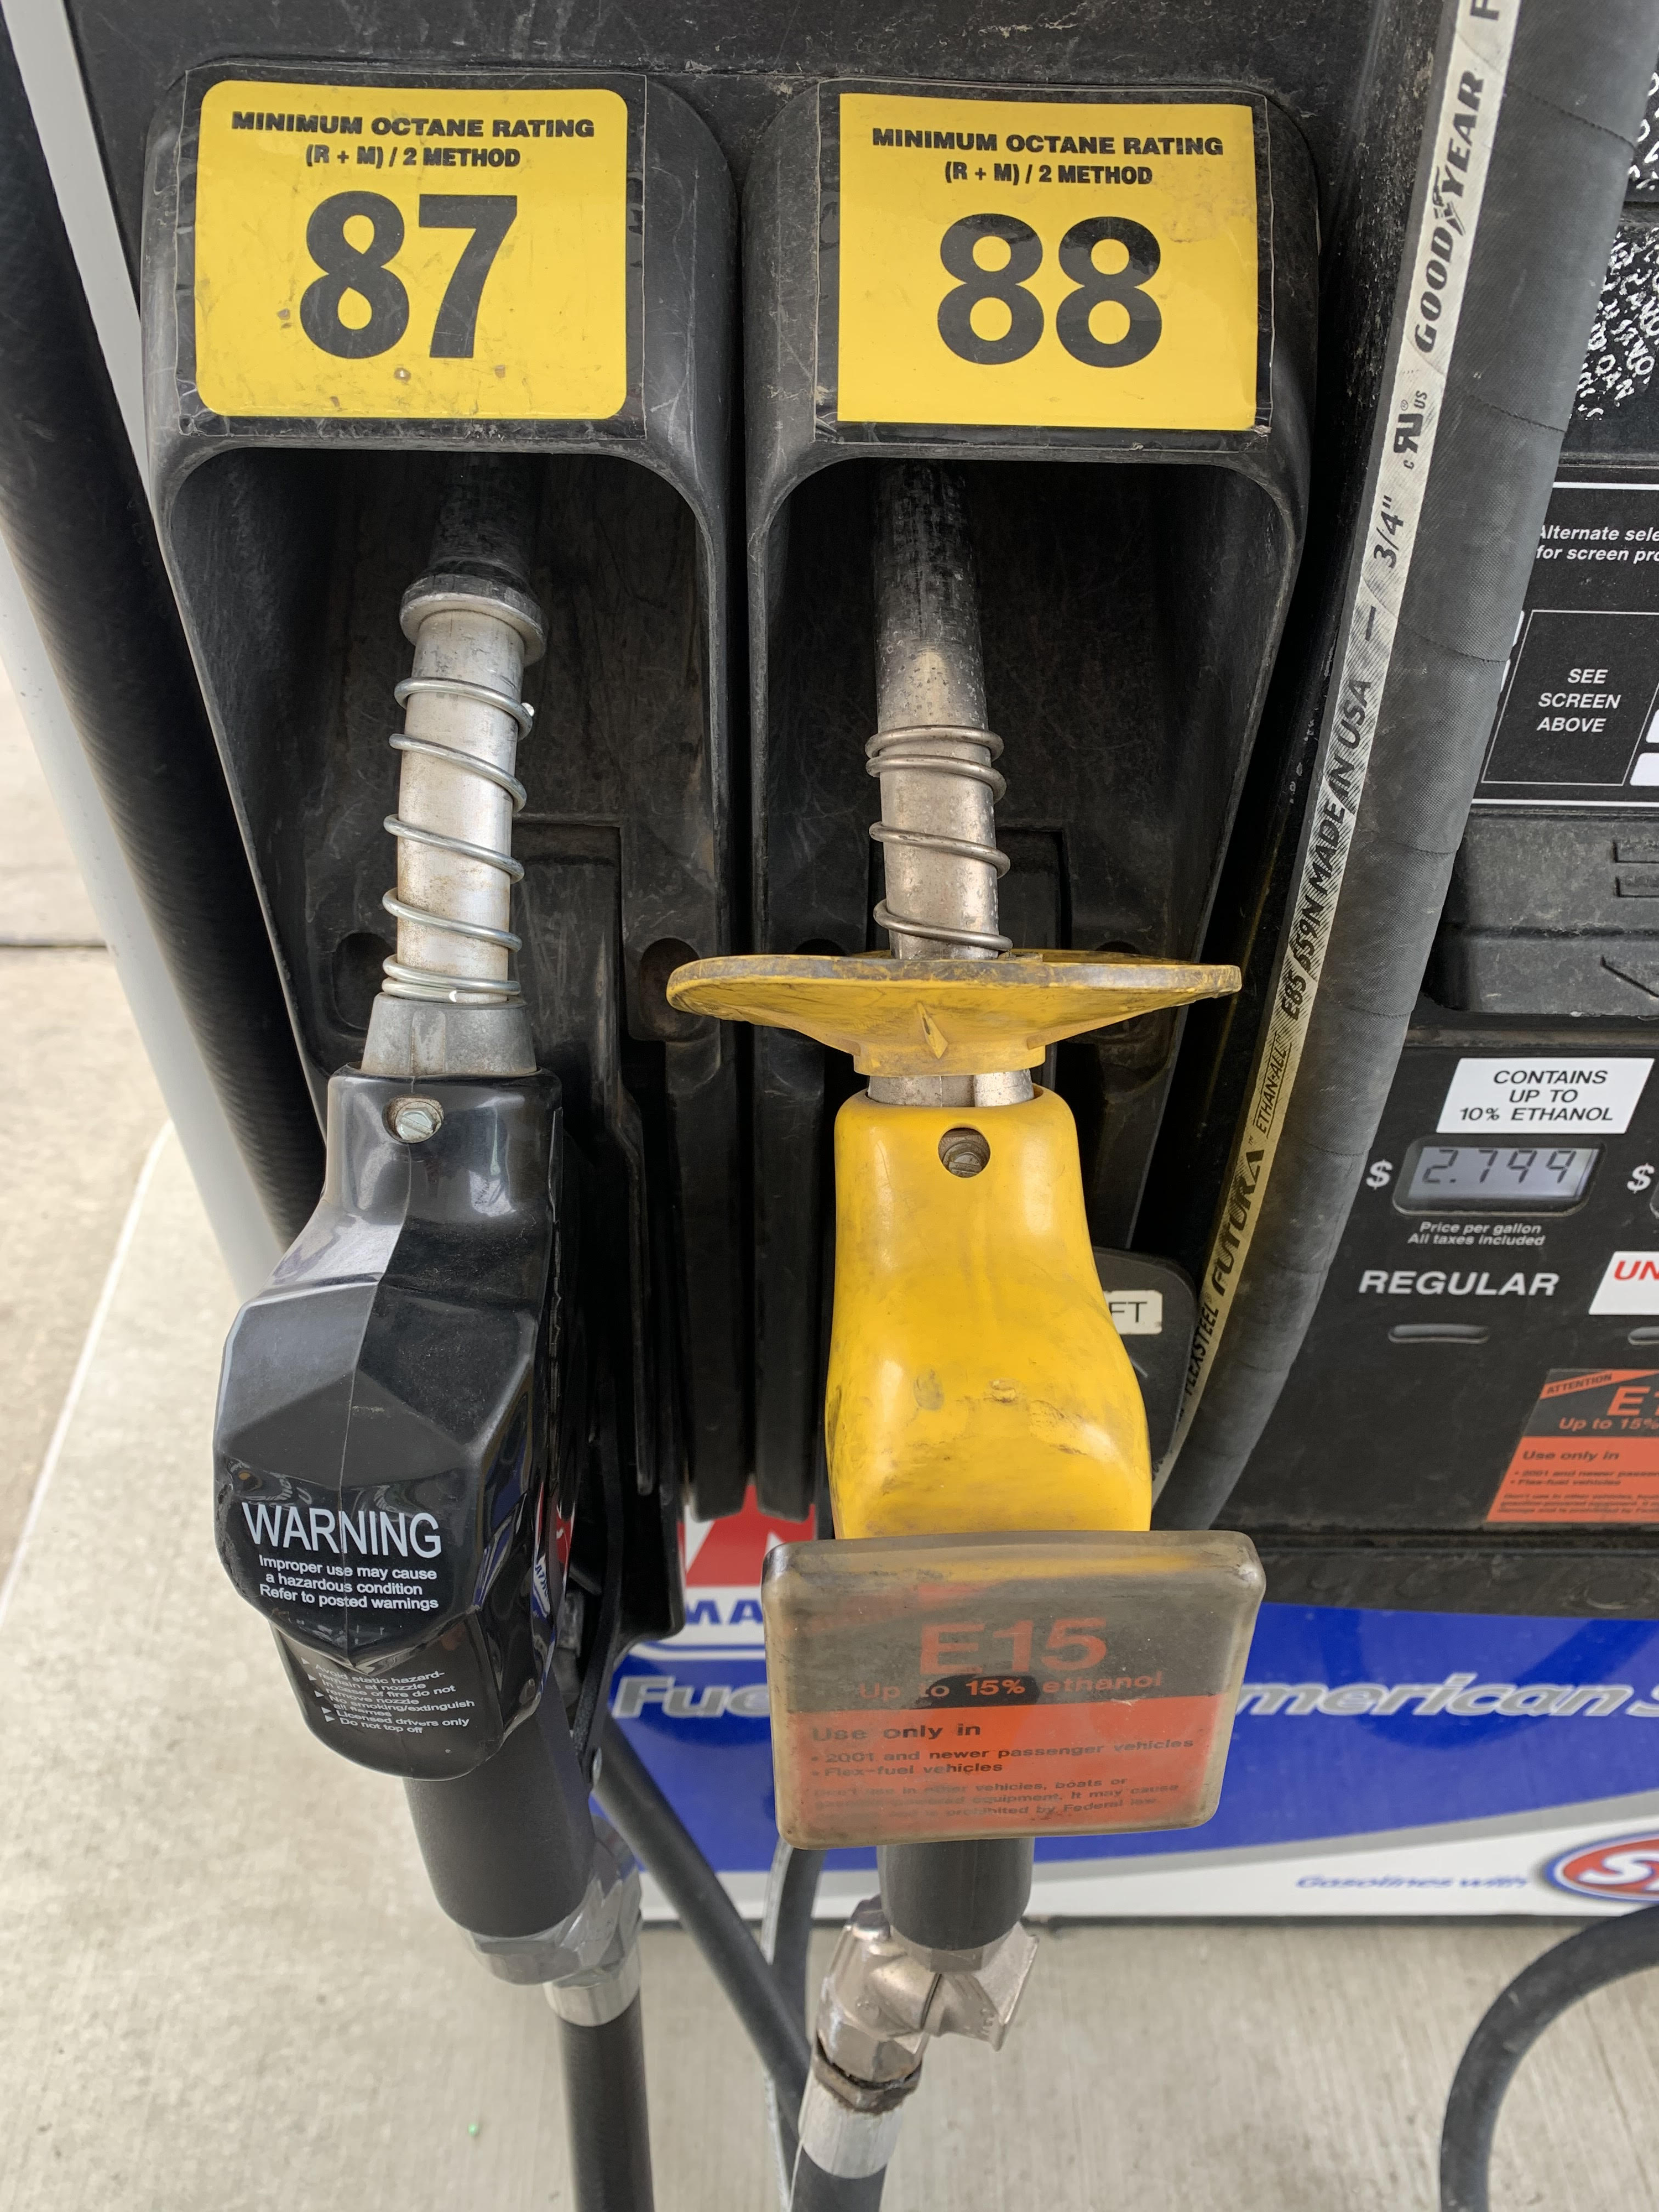 Afternoon Ag News, October 13, 2021: Gas prices on the rise